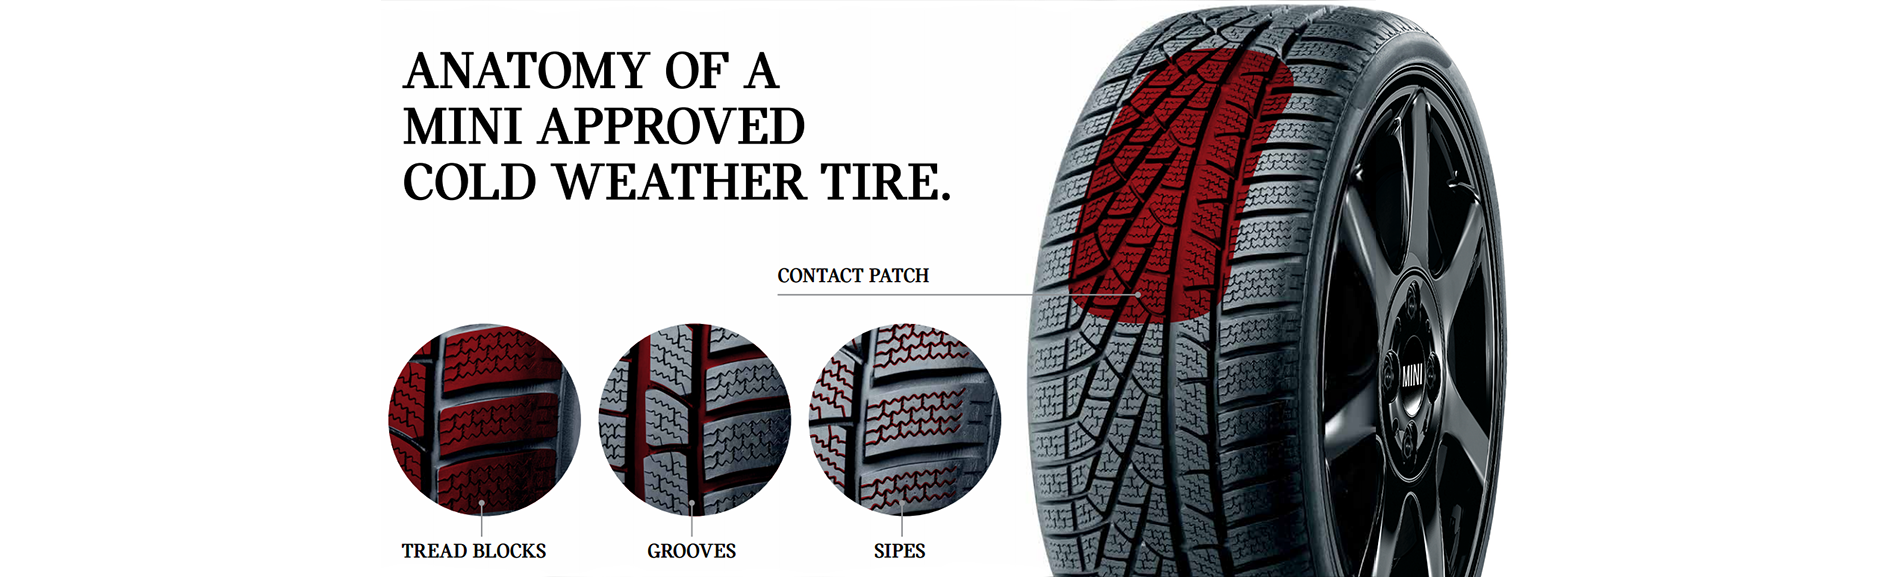 Four close-ups of MINI Approved Cold Weather Tires illustrating (from left to right): tread blocks, grooves, sipes and a contact patch